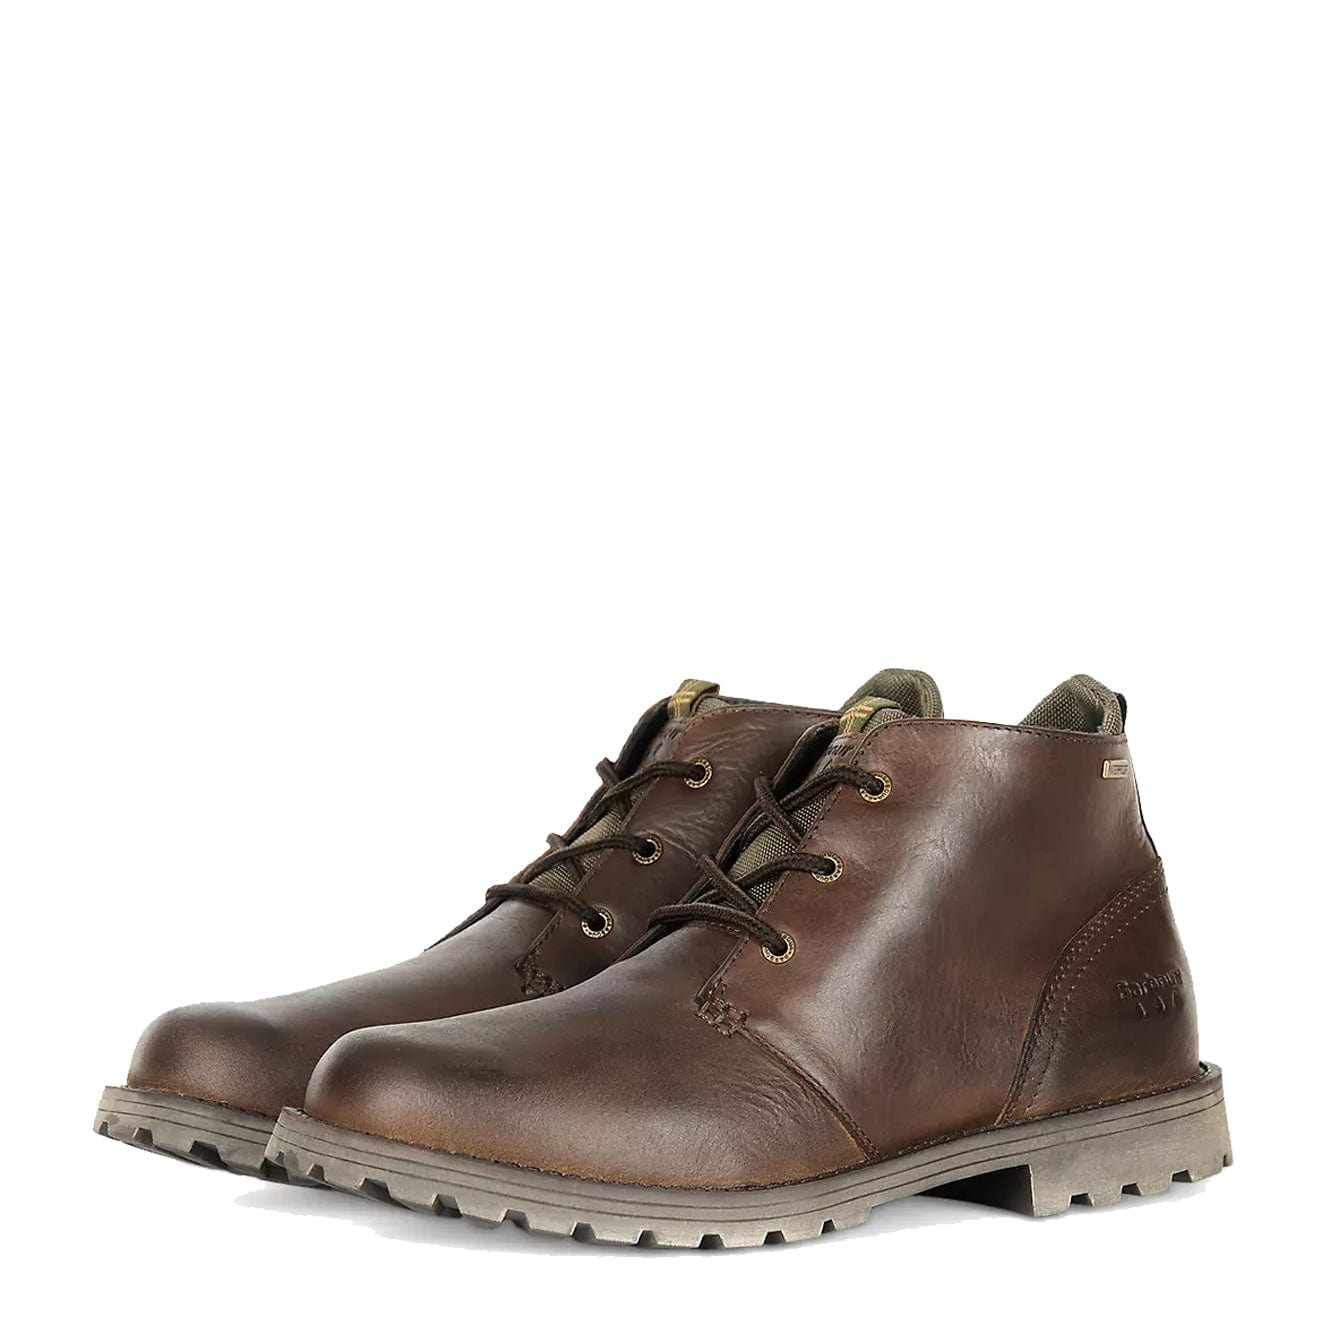 Barbour Pennine Boot Brown | The Sporting Lodge